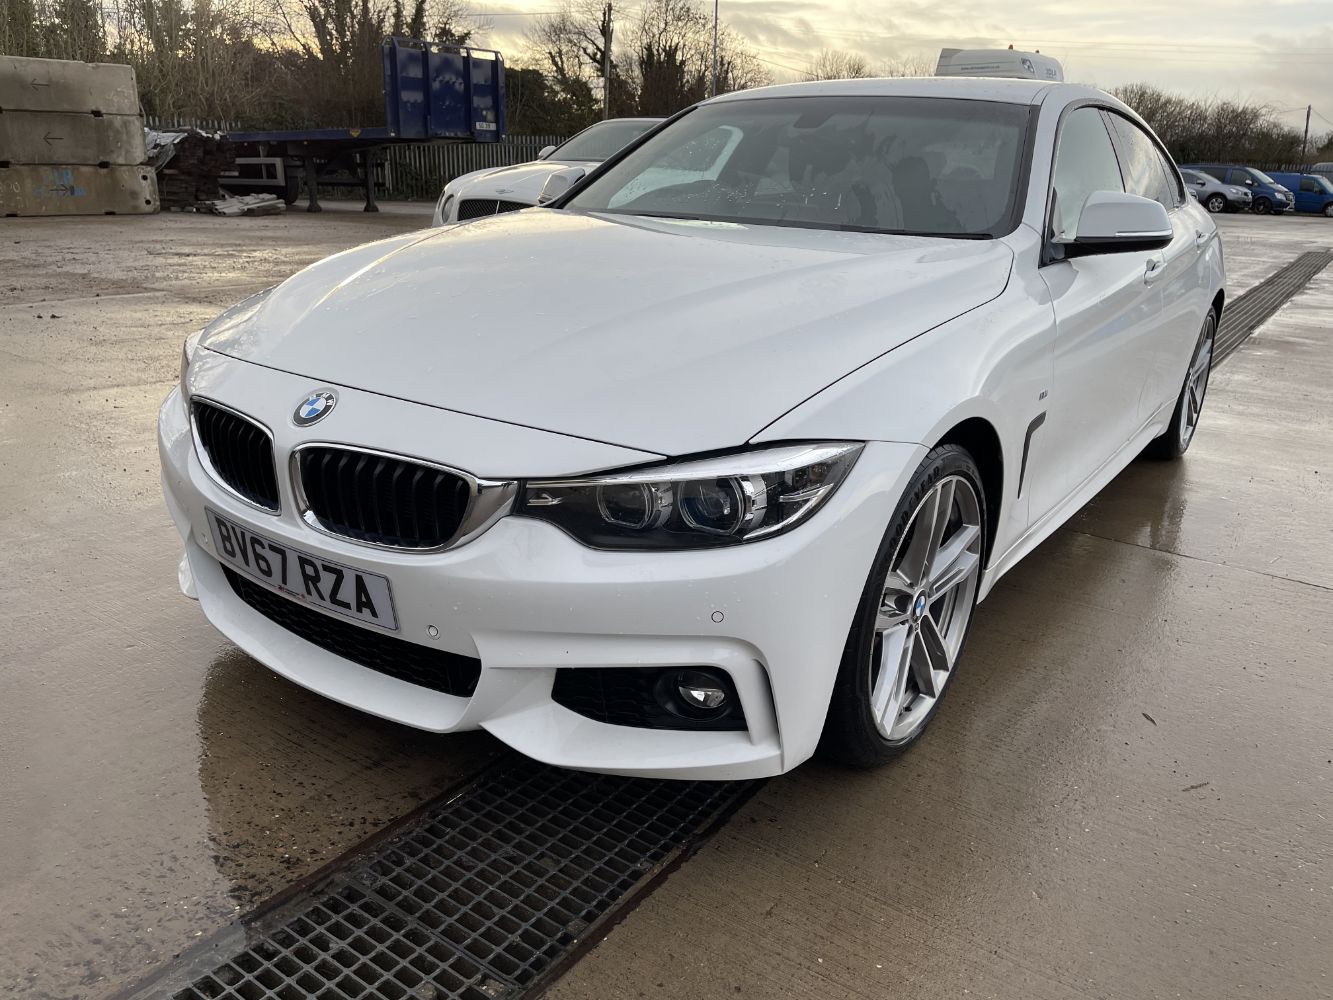 2017 BMW 420D M SPORT, 17 FORD TRANSIT CUSTOM, COMPACT TRACTOR, SCISSOR LIFTS ENDS TODAY 7PM